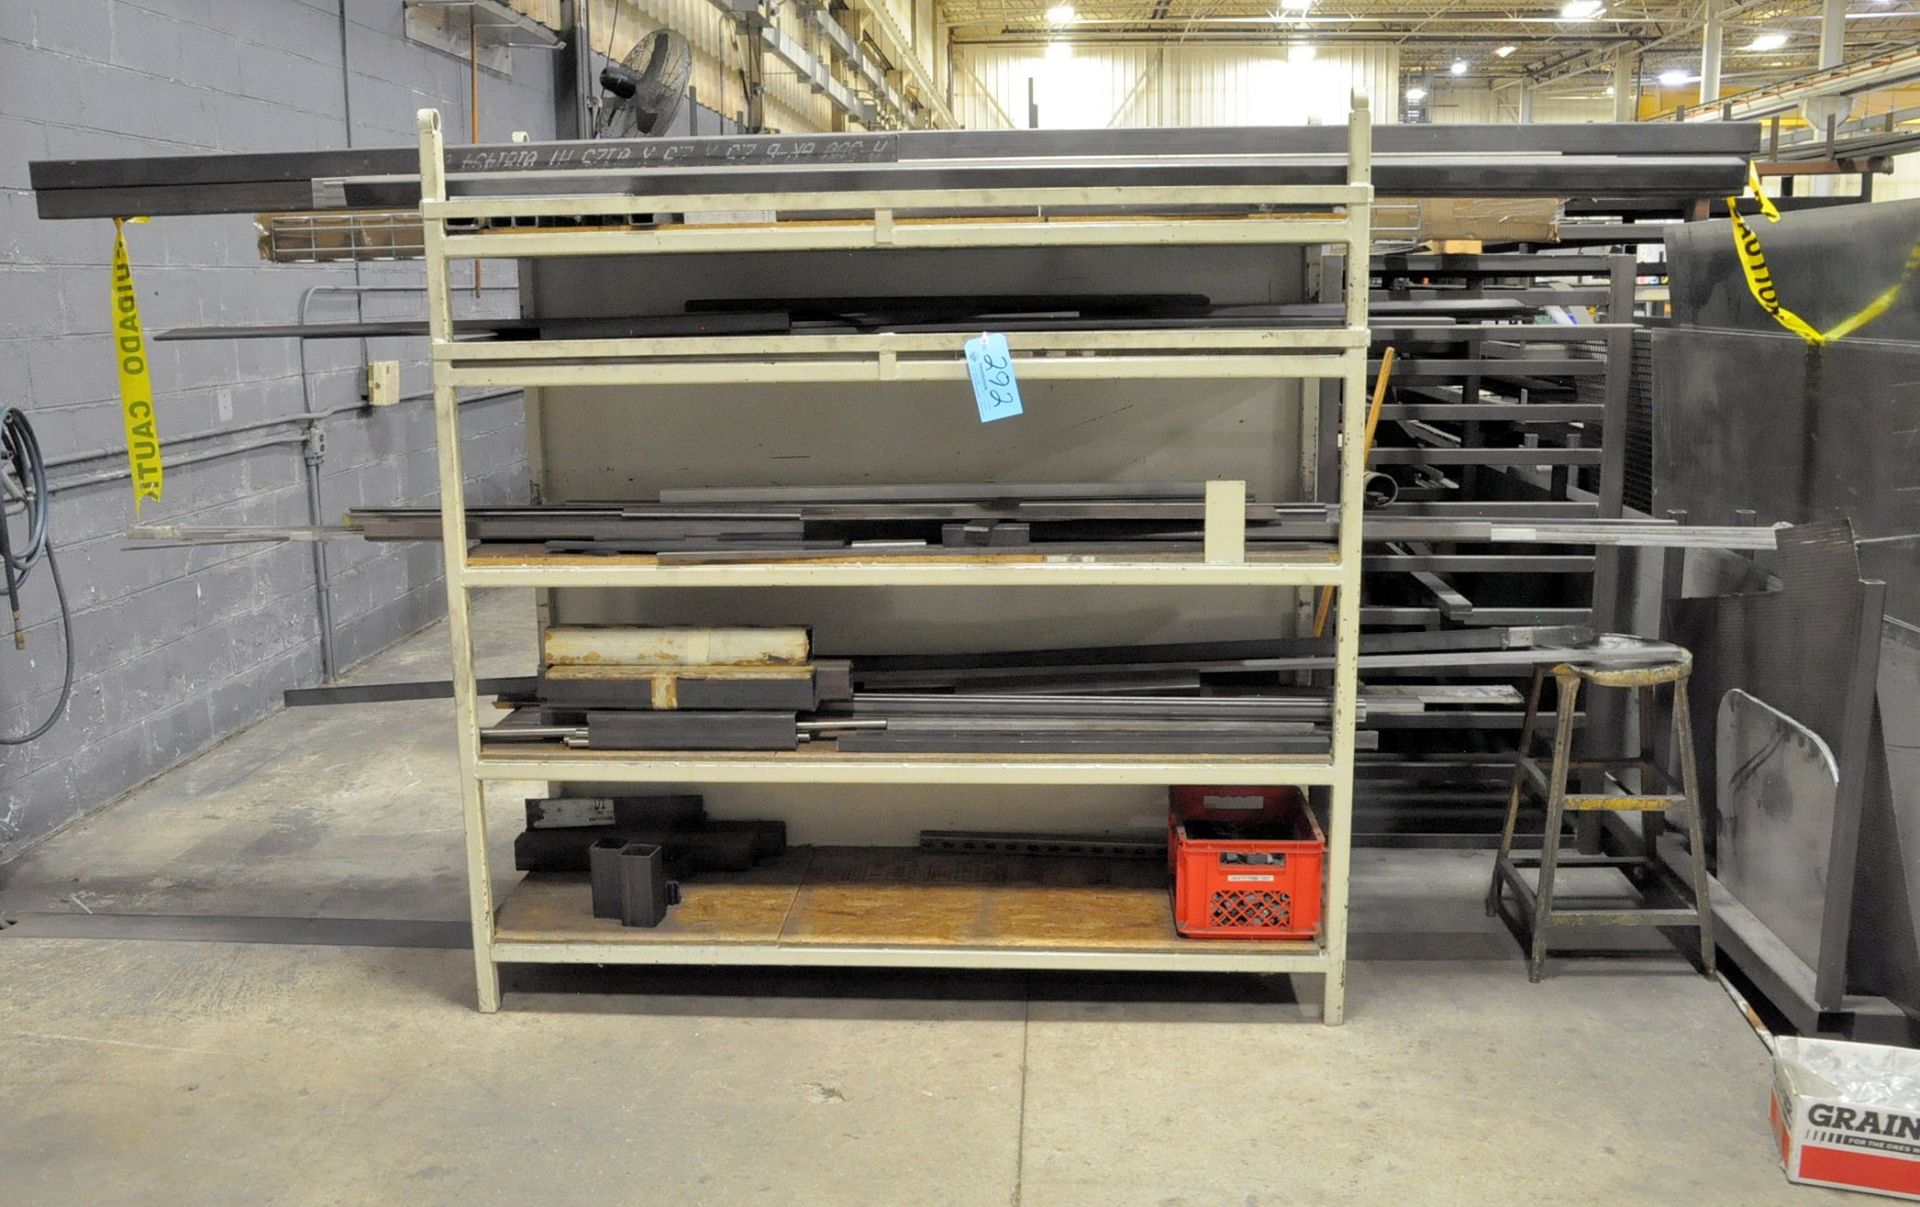 Lot-Structural Steel and Solid Stock on (4) Racks and Loose on the Floor, with Stands - Image 7 of 13